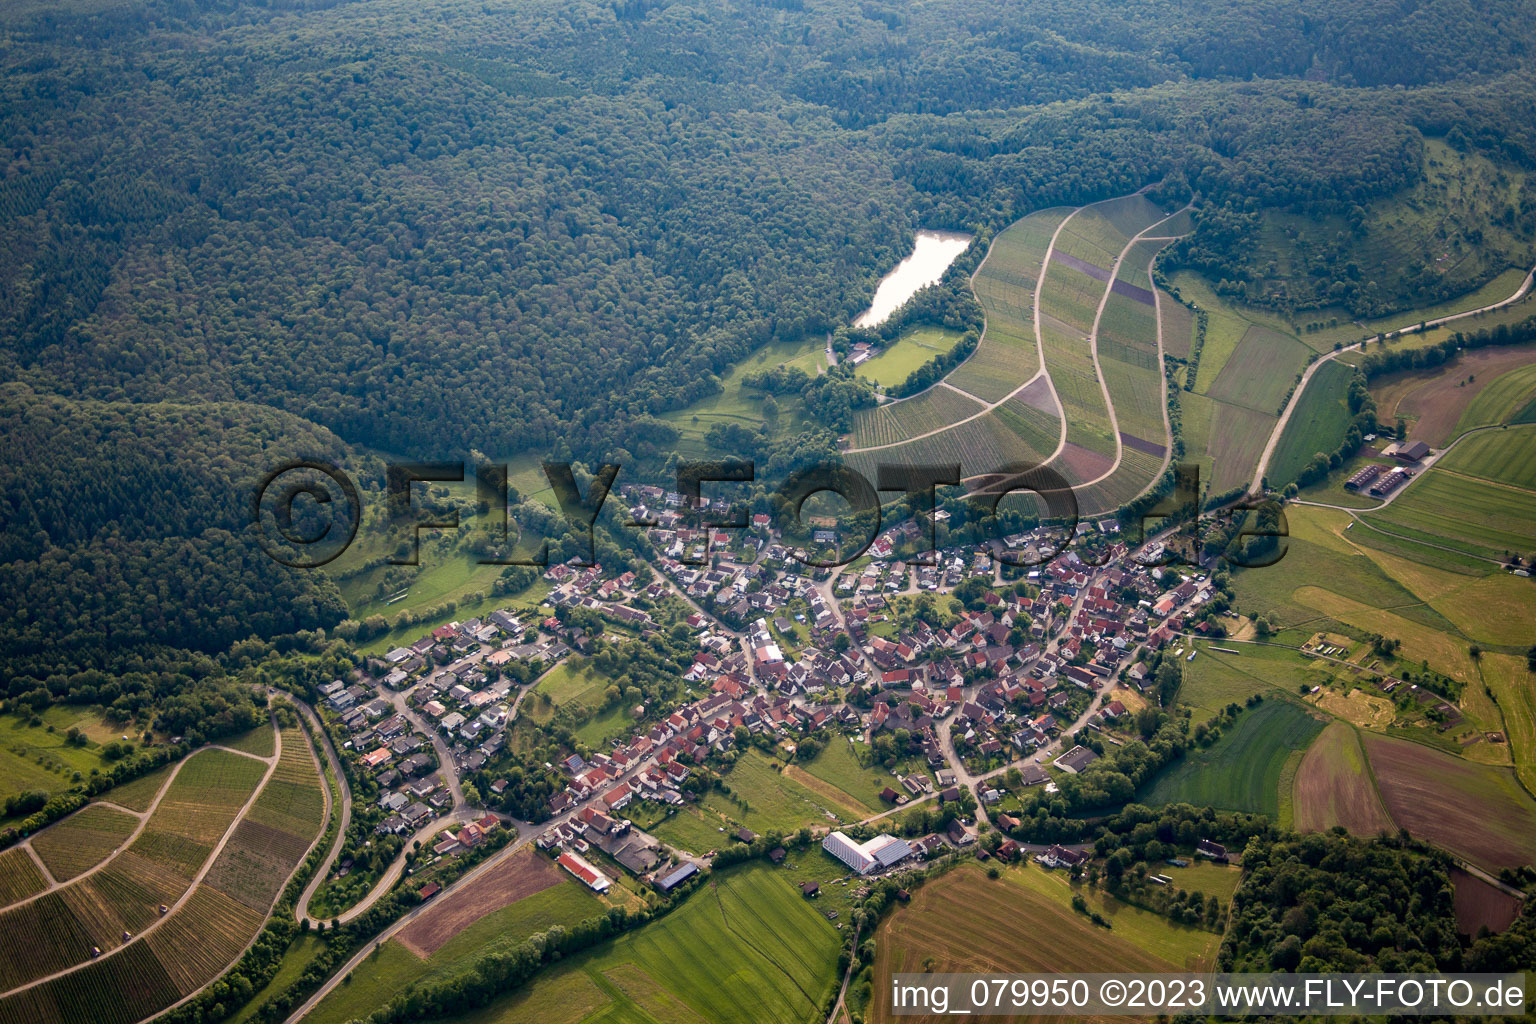 Aerial photograpy of Village - view on the edge of agricultural fields and farmland in the district Haefnerhaslach in Sachsenheim in the state Baden-Wurttemberg, Germany